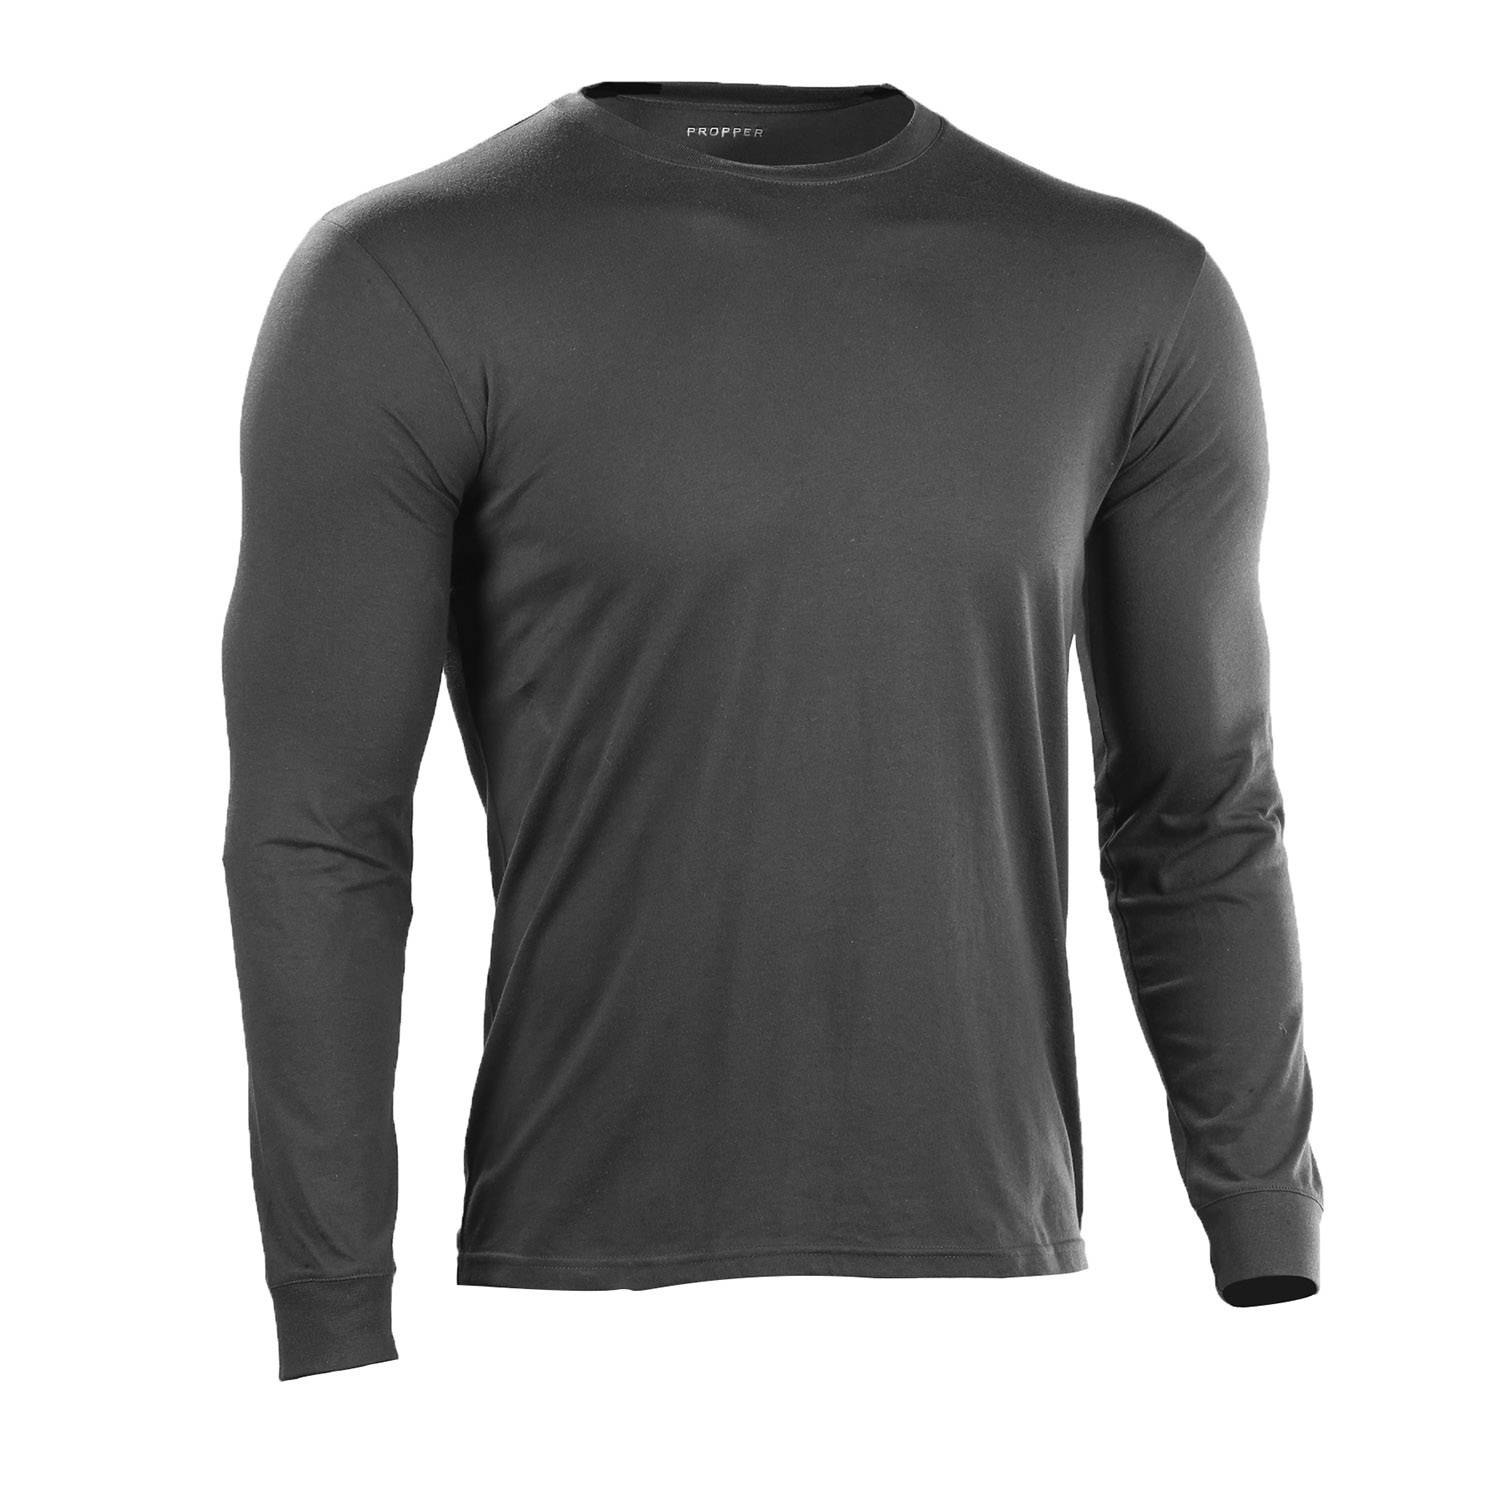 PROPPER LONG SLEEVE T-SHIRTS (2 PACK)